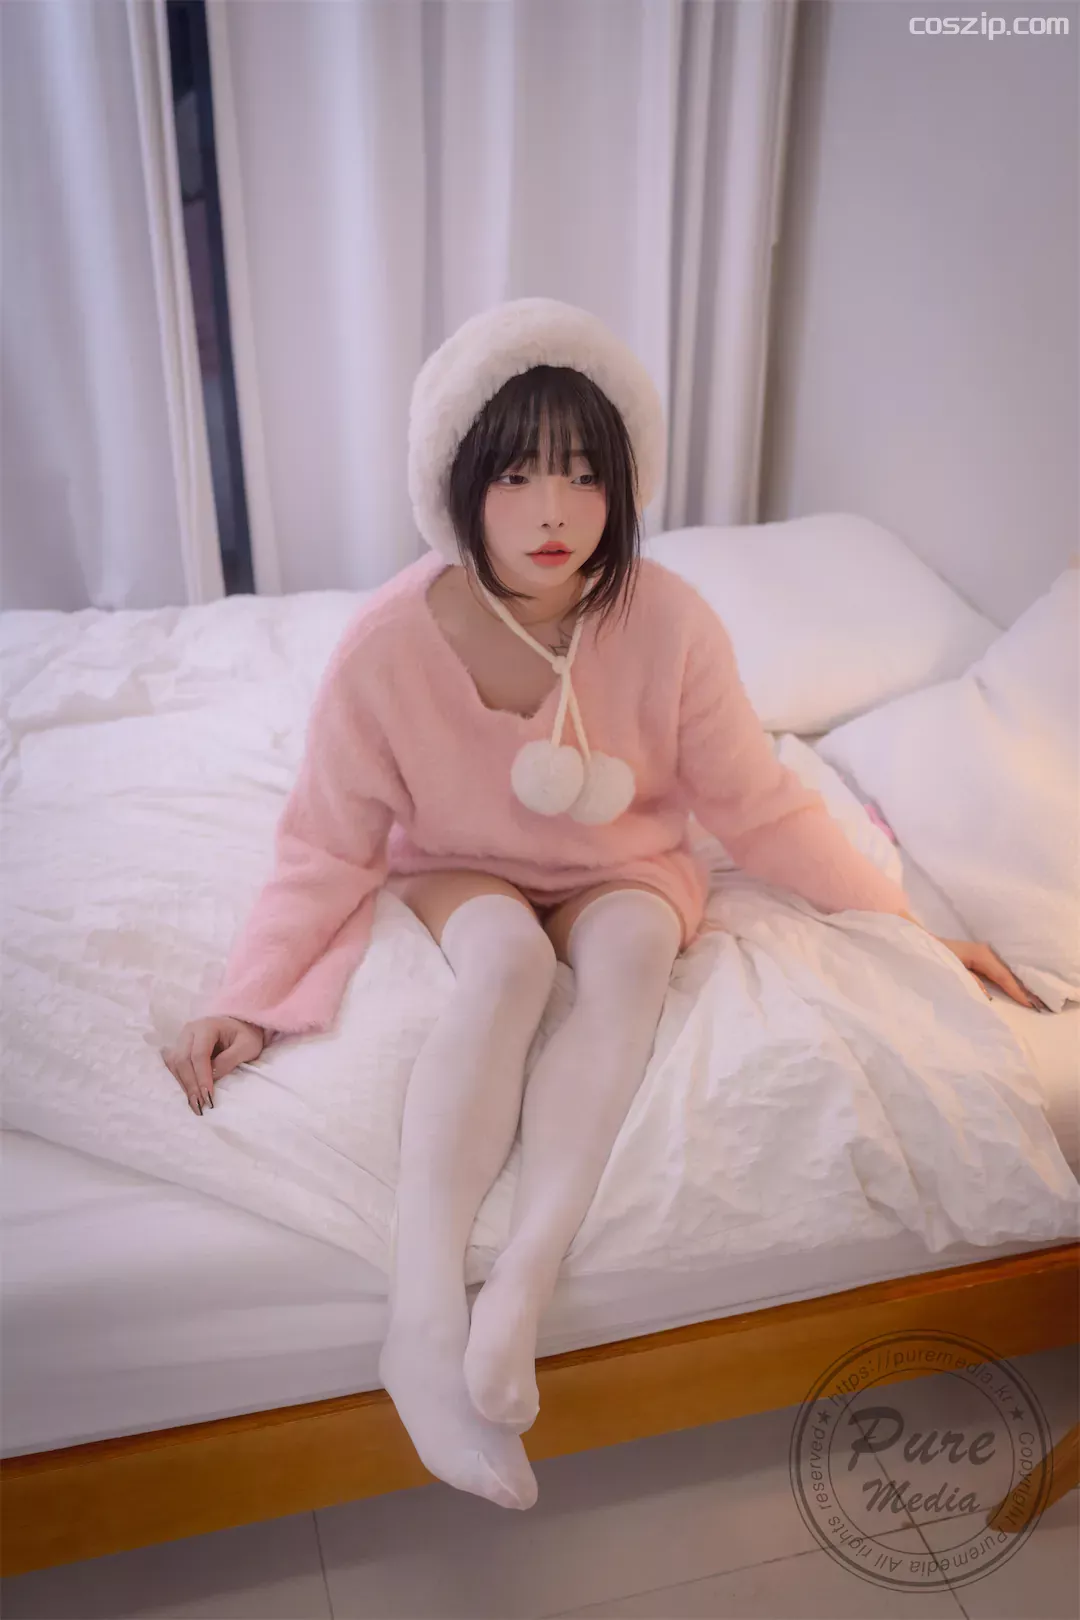 Pure-Media-Vol.266-Jelly-Cutie-Rabbit-and-Pink-Hole-coszip.com-031